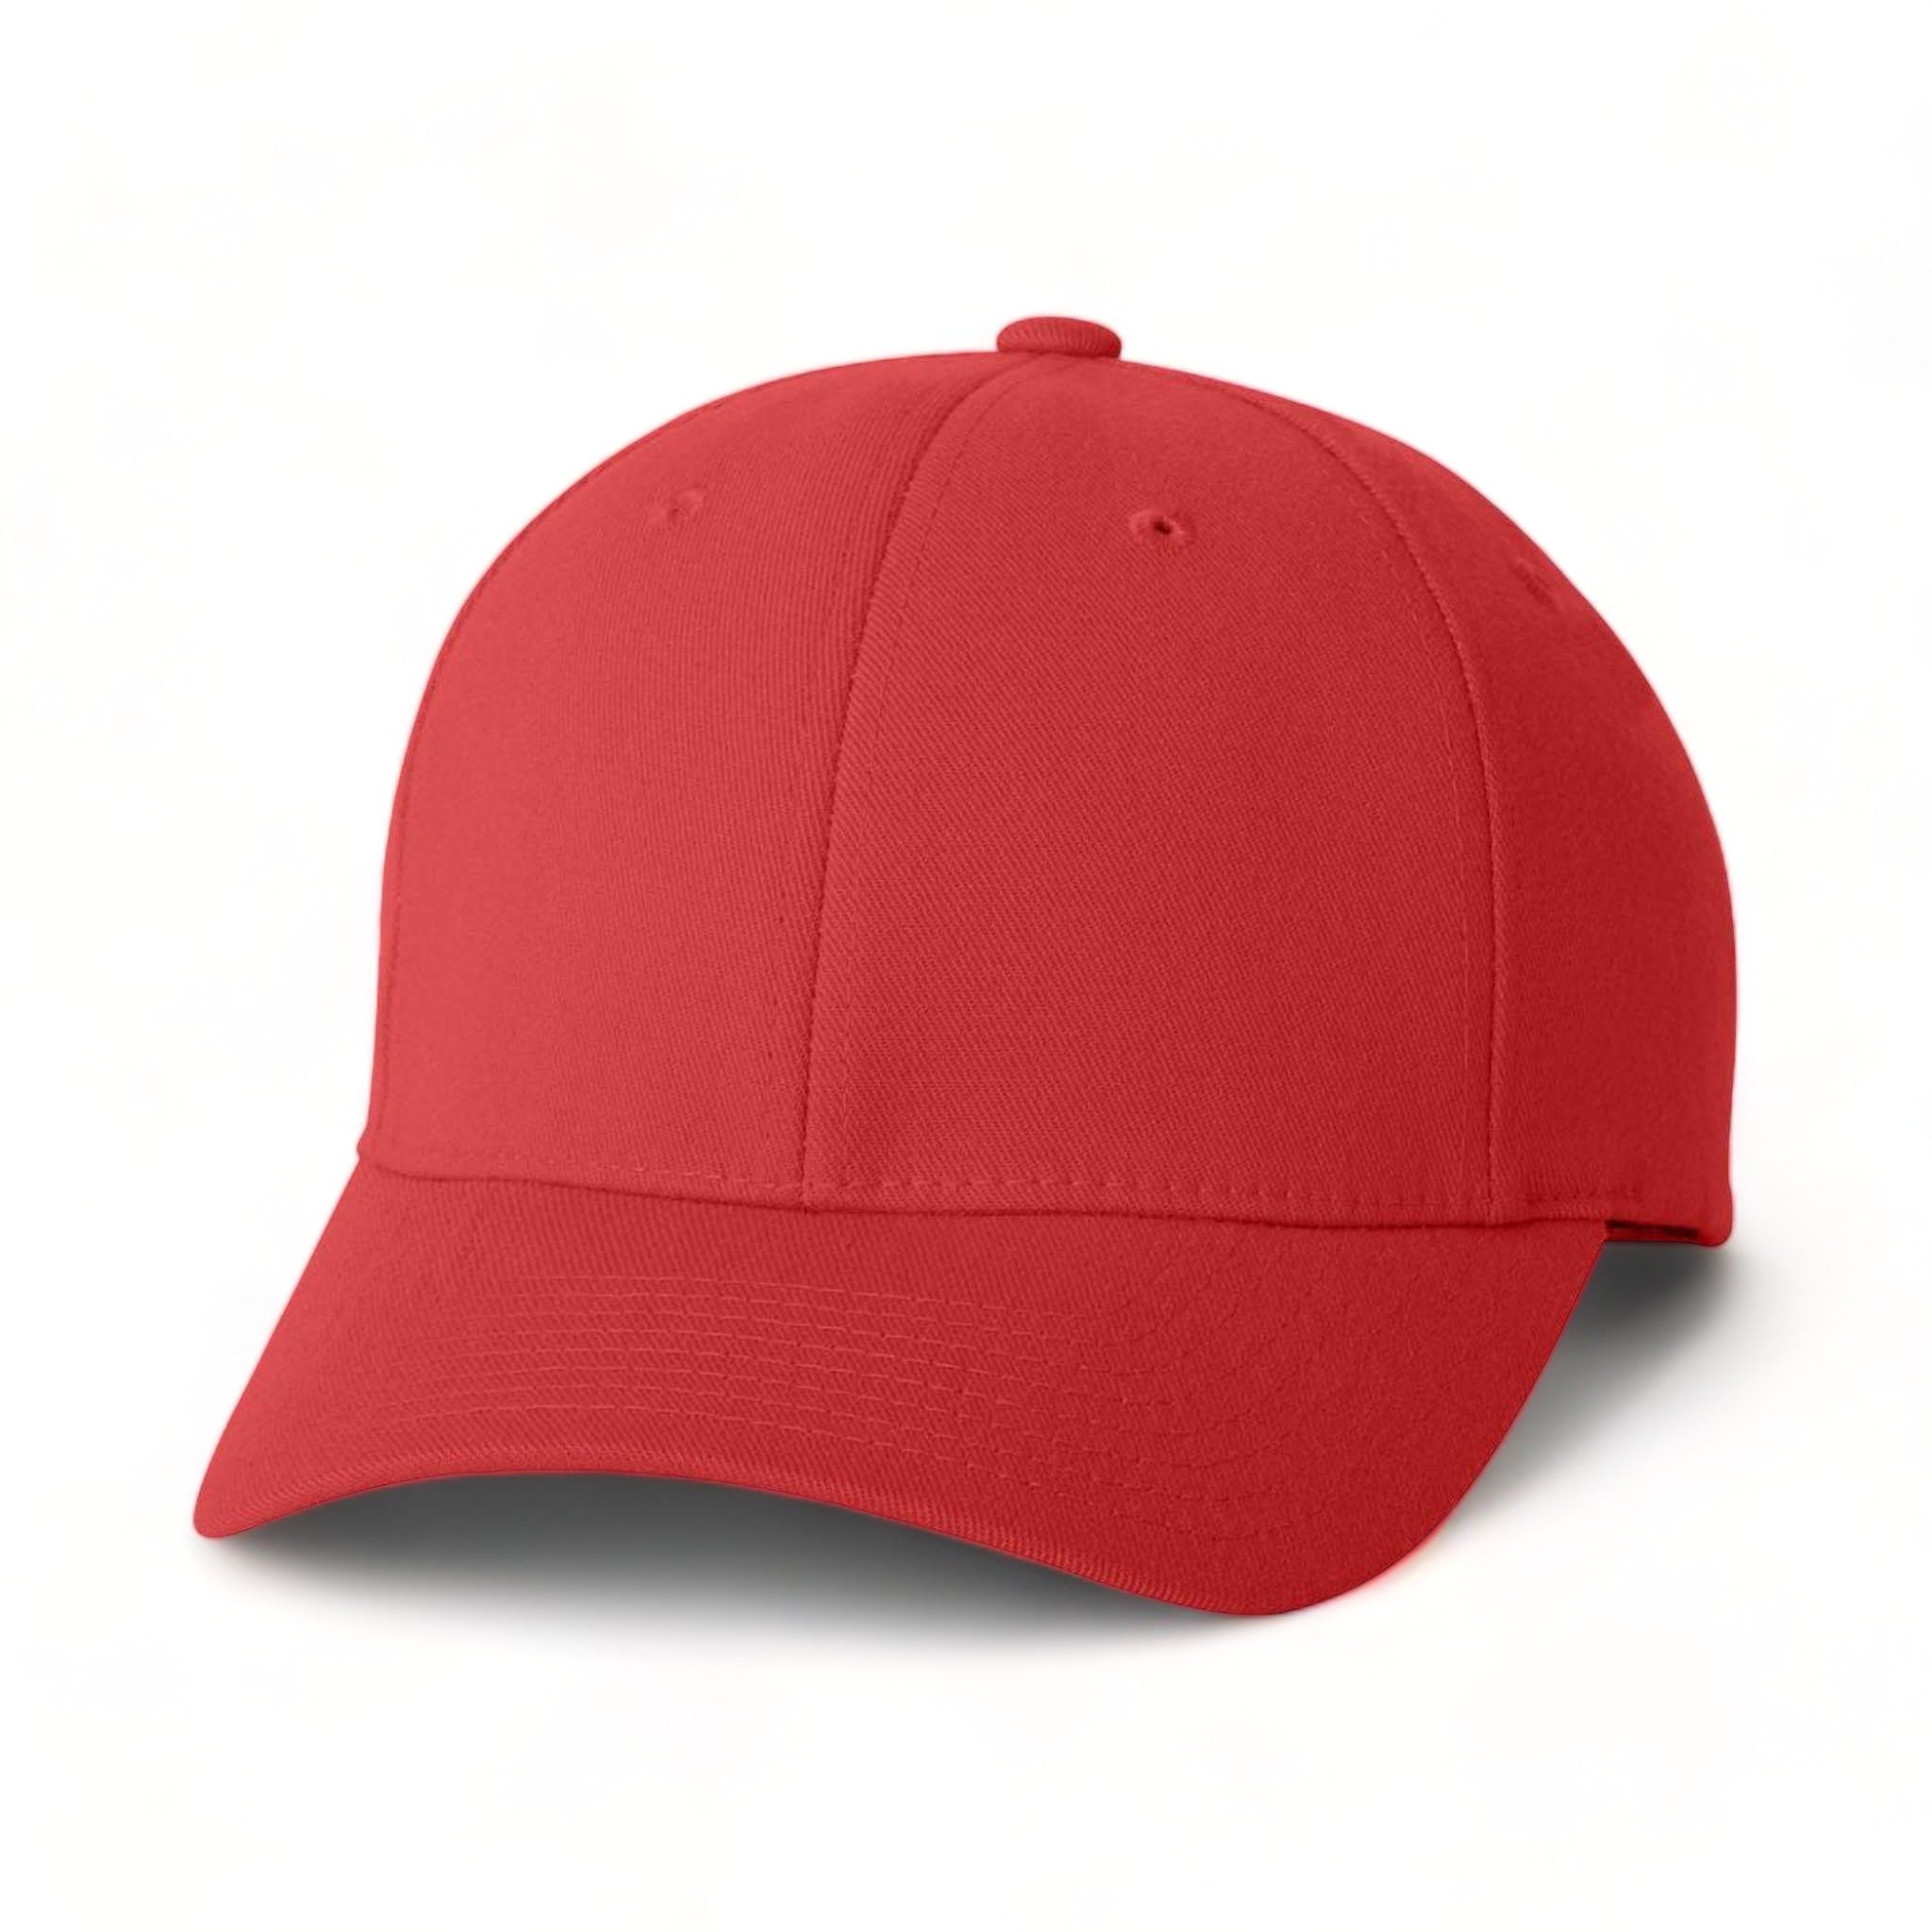 Front view of Flexfit 6580 custom hat in red